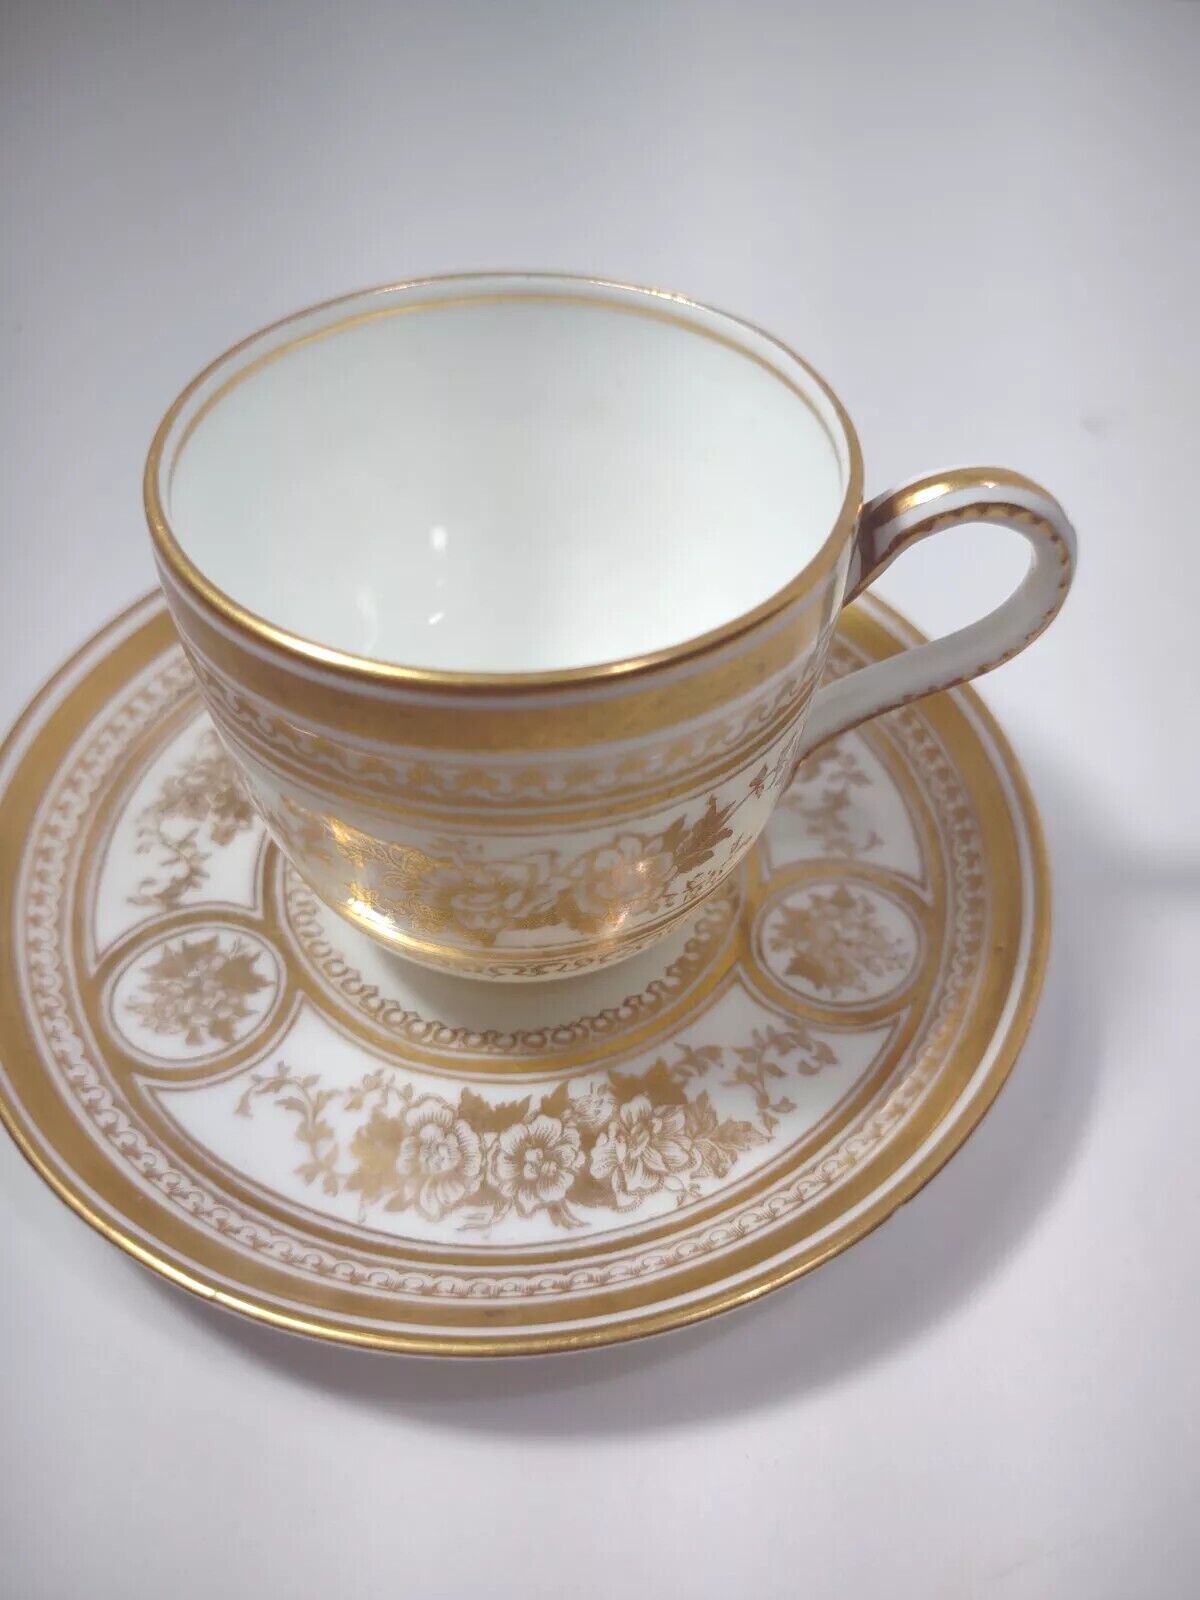 George Jones and Sons Crescent china cup and saucer-made in England